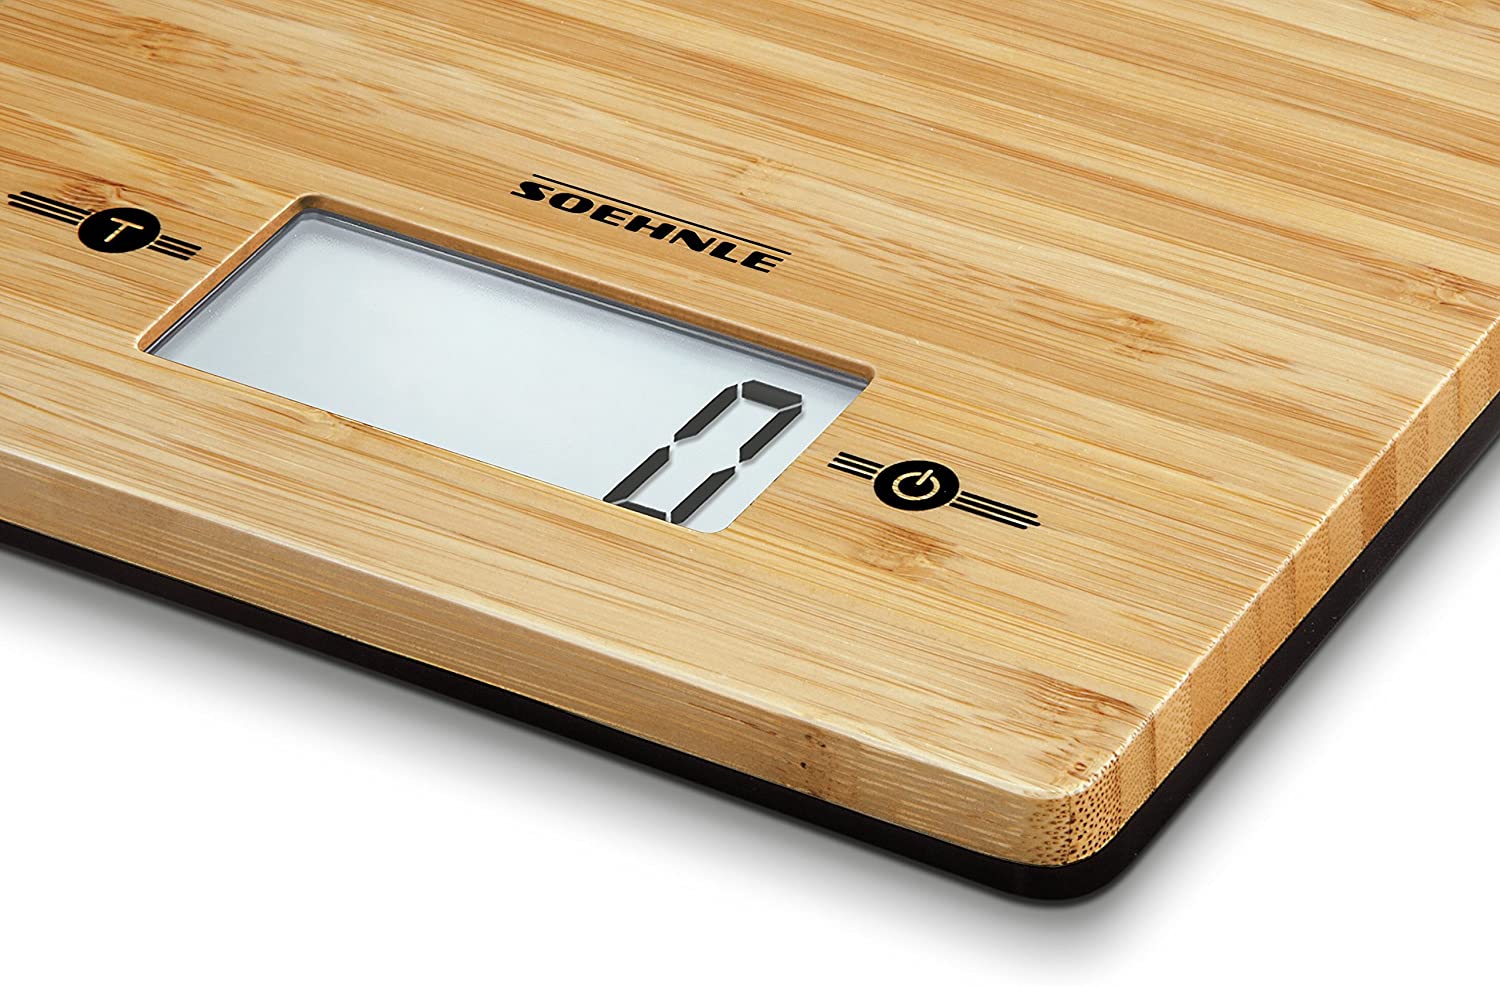 Soehnle Bamboo Digital Kitchen Scales High Quality Natural Real Bamboo Electronic Scale with Sensor Touch Weight up to 5 kg Batteries Included Hygienic Weighing Surface